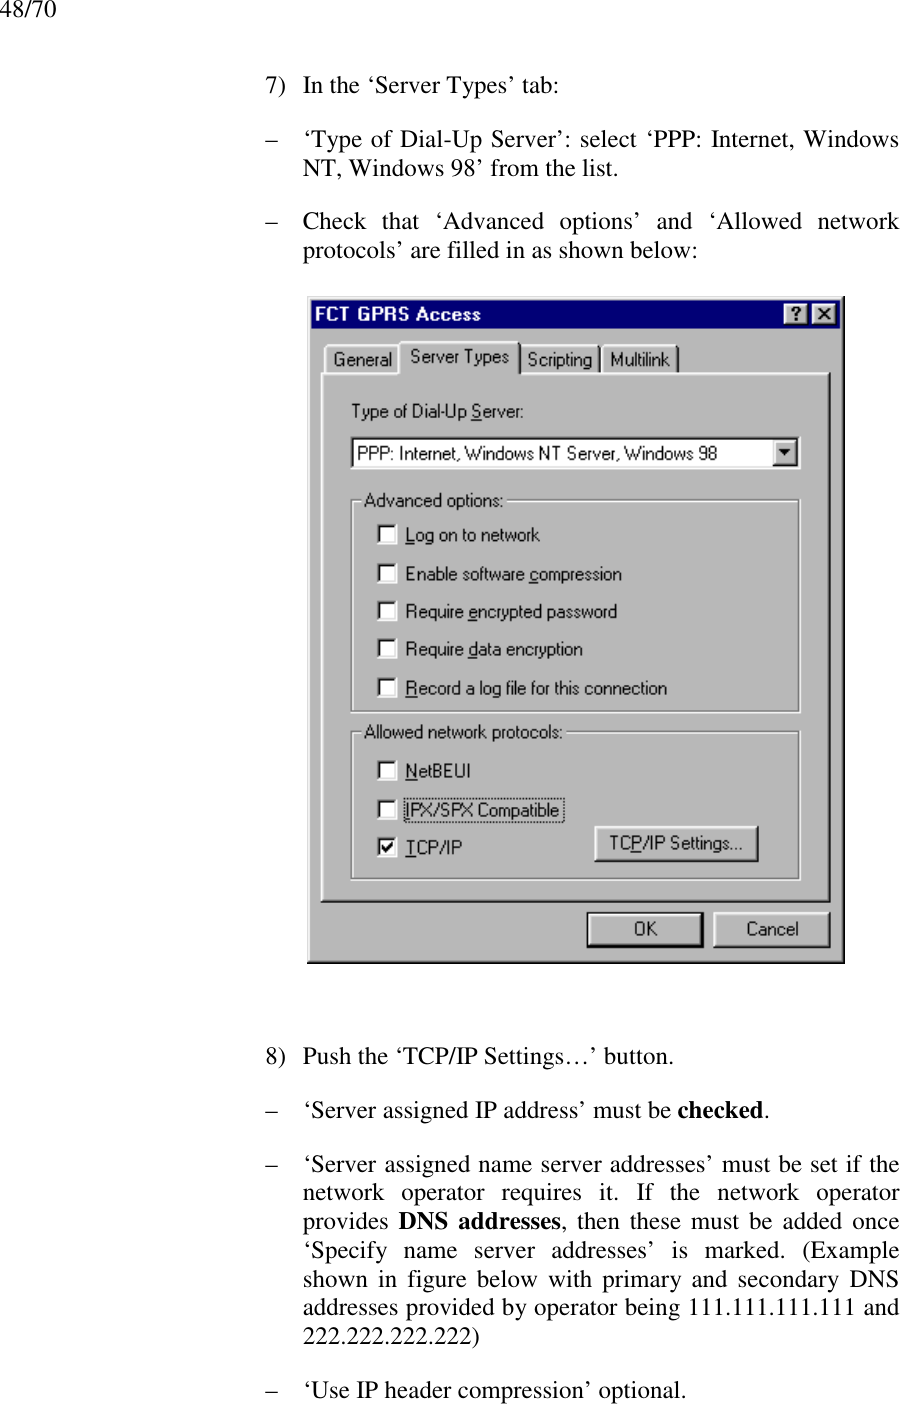 48/707) In the ‘Server Types’ tab:– ‘Type of Dial-Up Server’: select ‘PPP: Internet, WindowsNT, Windows 98’ from the list.– Check that ‘Advanced options’ and ‘Allowed networkprotocols’ are filled in as shown below:8) Push the ‘TCP/IP Settings…’ button.– ‘Server assigned IP address’ must be checked.– ‘Server assigned name server addresses’ must be set if thenetwork operator requires it. If the network operatorprovides DNS addresses, then these must be added once‘Specify name server addresses’ is marked. (Exampleshown in figure below with primary and secondary DNSaddresses provided by operator being 111.111.111.111 and222.222.222.222)– ‘Use IP header compression’ optional.